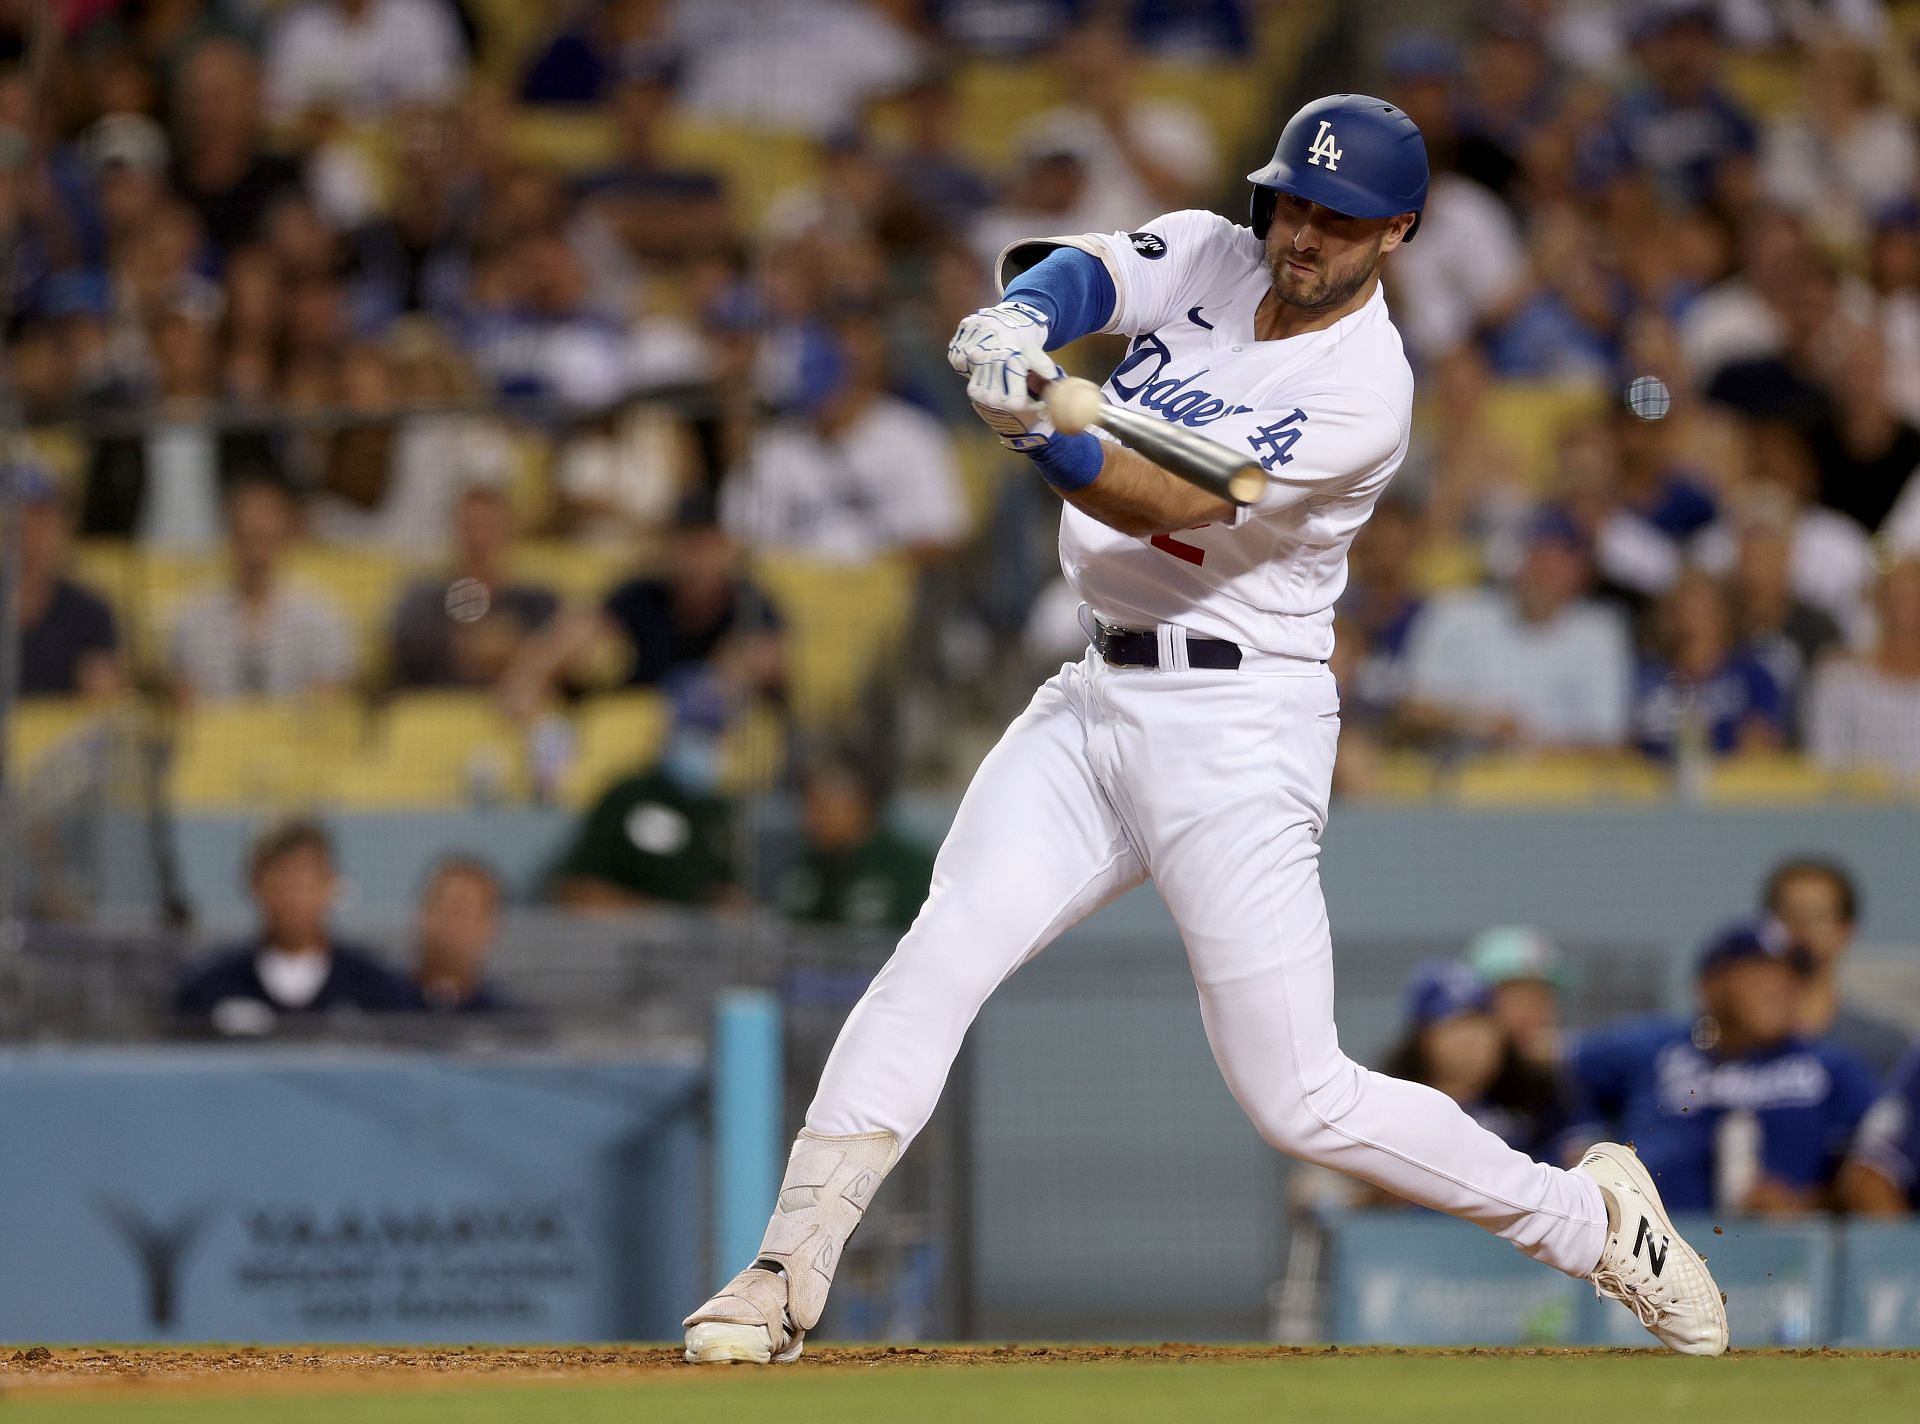 RUMOR: The three teams interested trade for Yankees' Joey Gallo